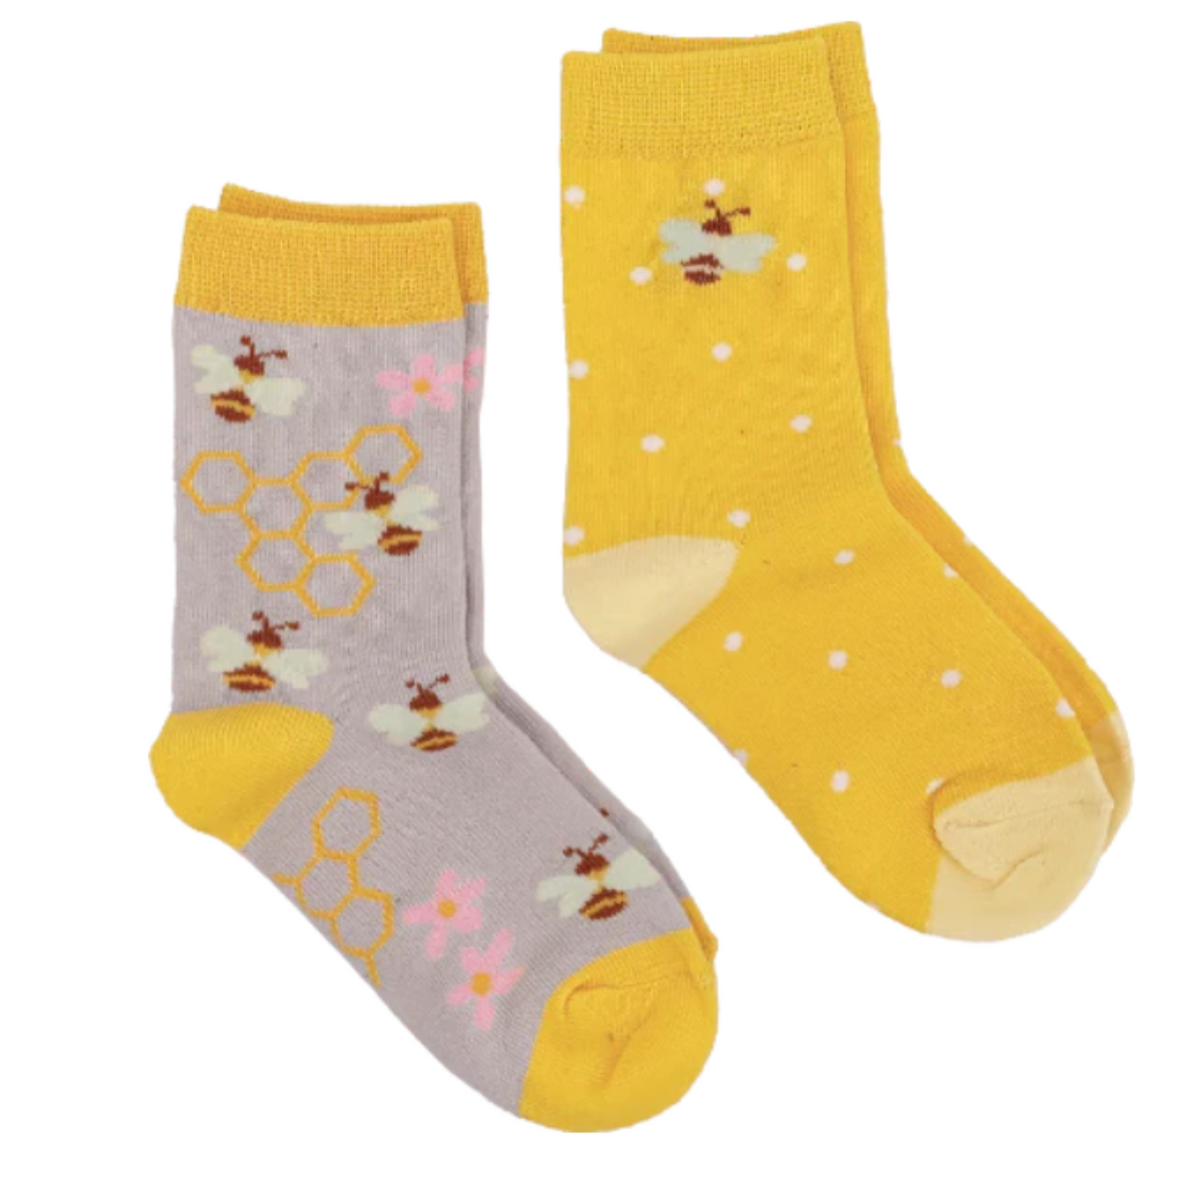 Sock Harbor Bees 2-pack kids&#39; crew socks featuring gray sock with images of bees, flowers, and honeycomb and yellow sock with bee and white polka dots. Socks shown flat on display. 